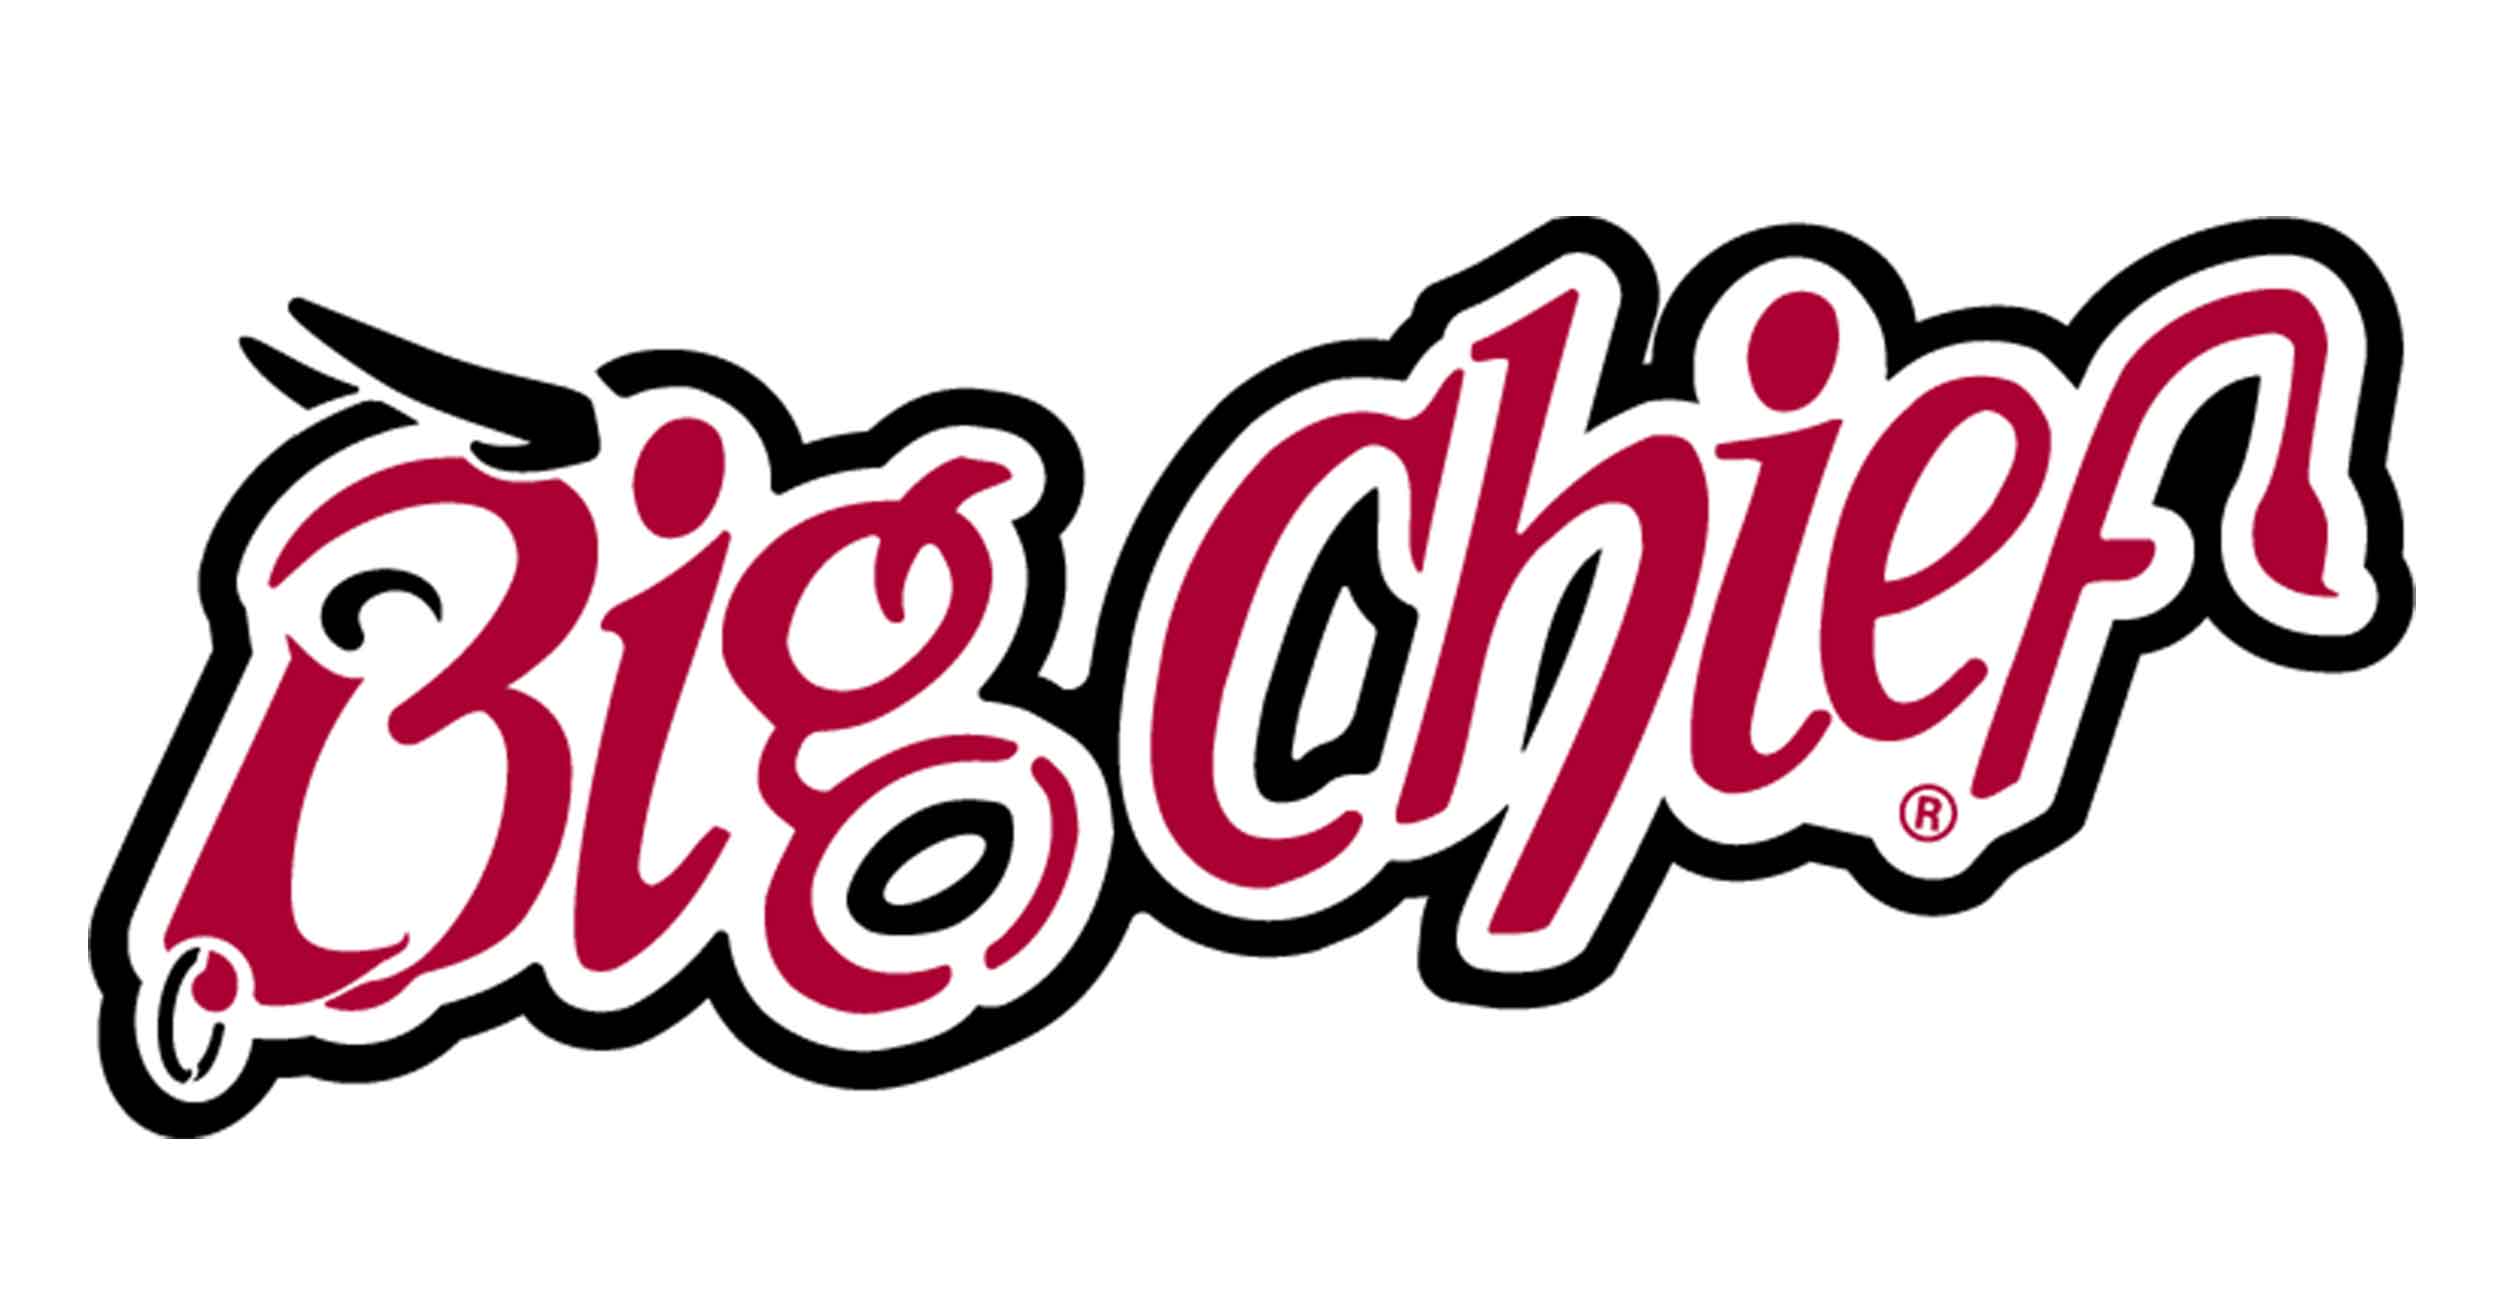 Big Chief Building Expansion and Renovation in Calgary Logo